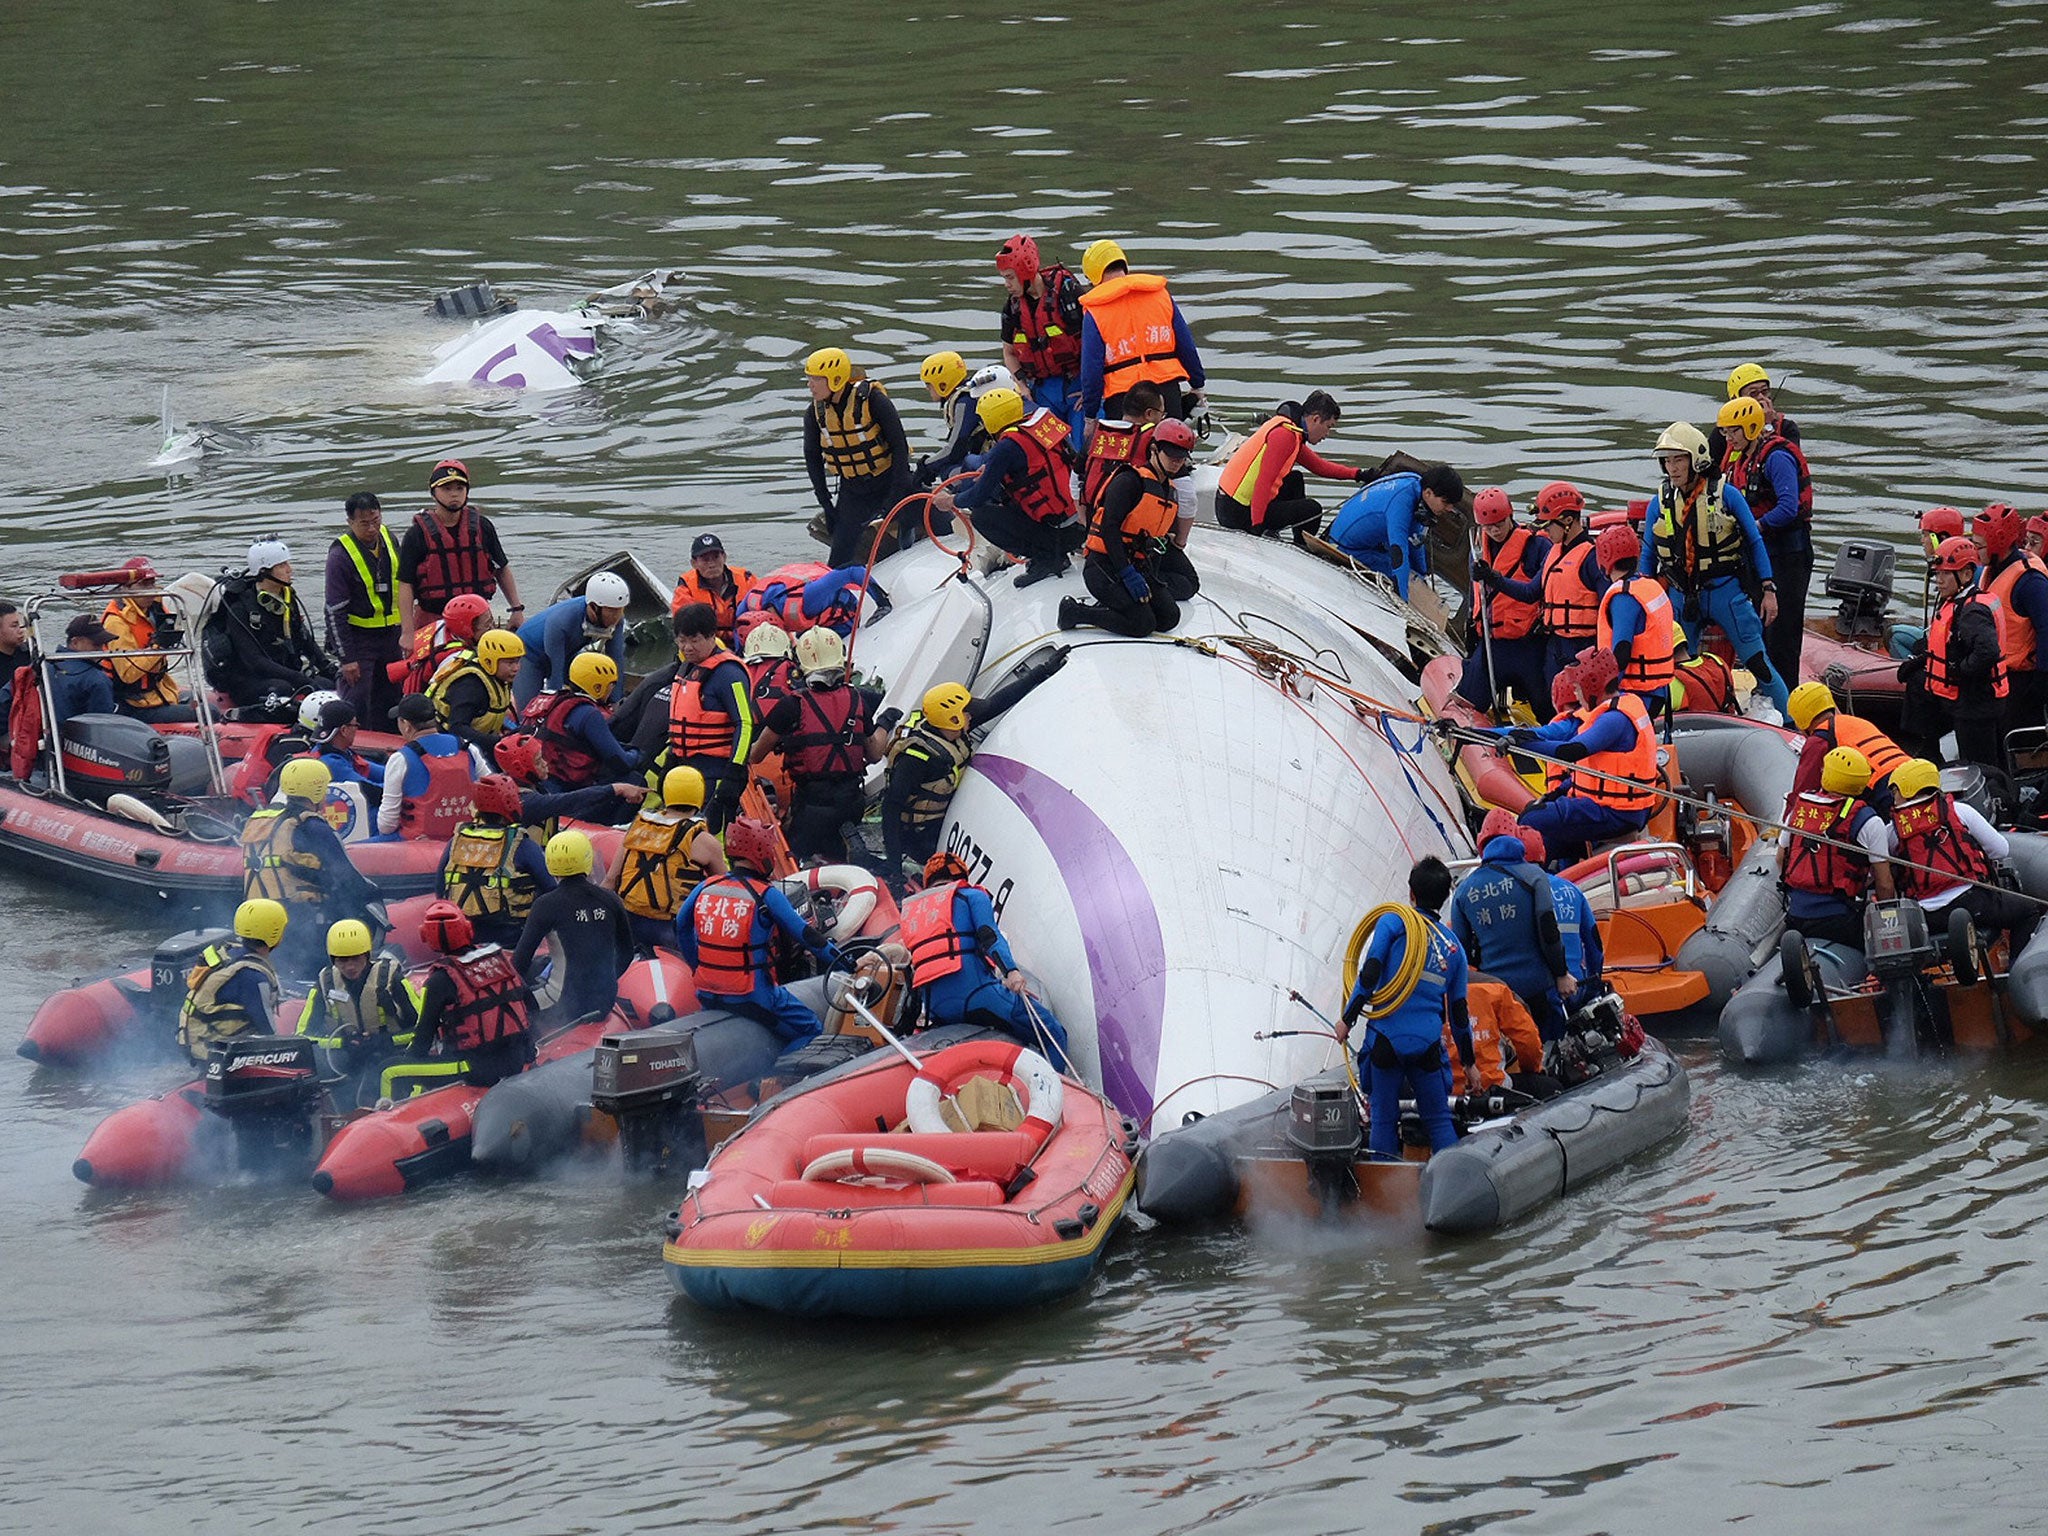 Rescue personnel work to free passengers from a TransAsia ATR 72-600 turboprop plane that crash-landed into a river outside Taiwan's capital Taipei